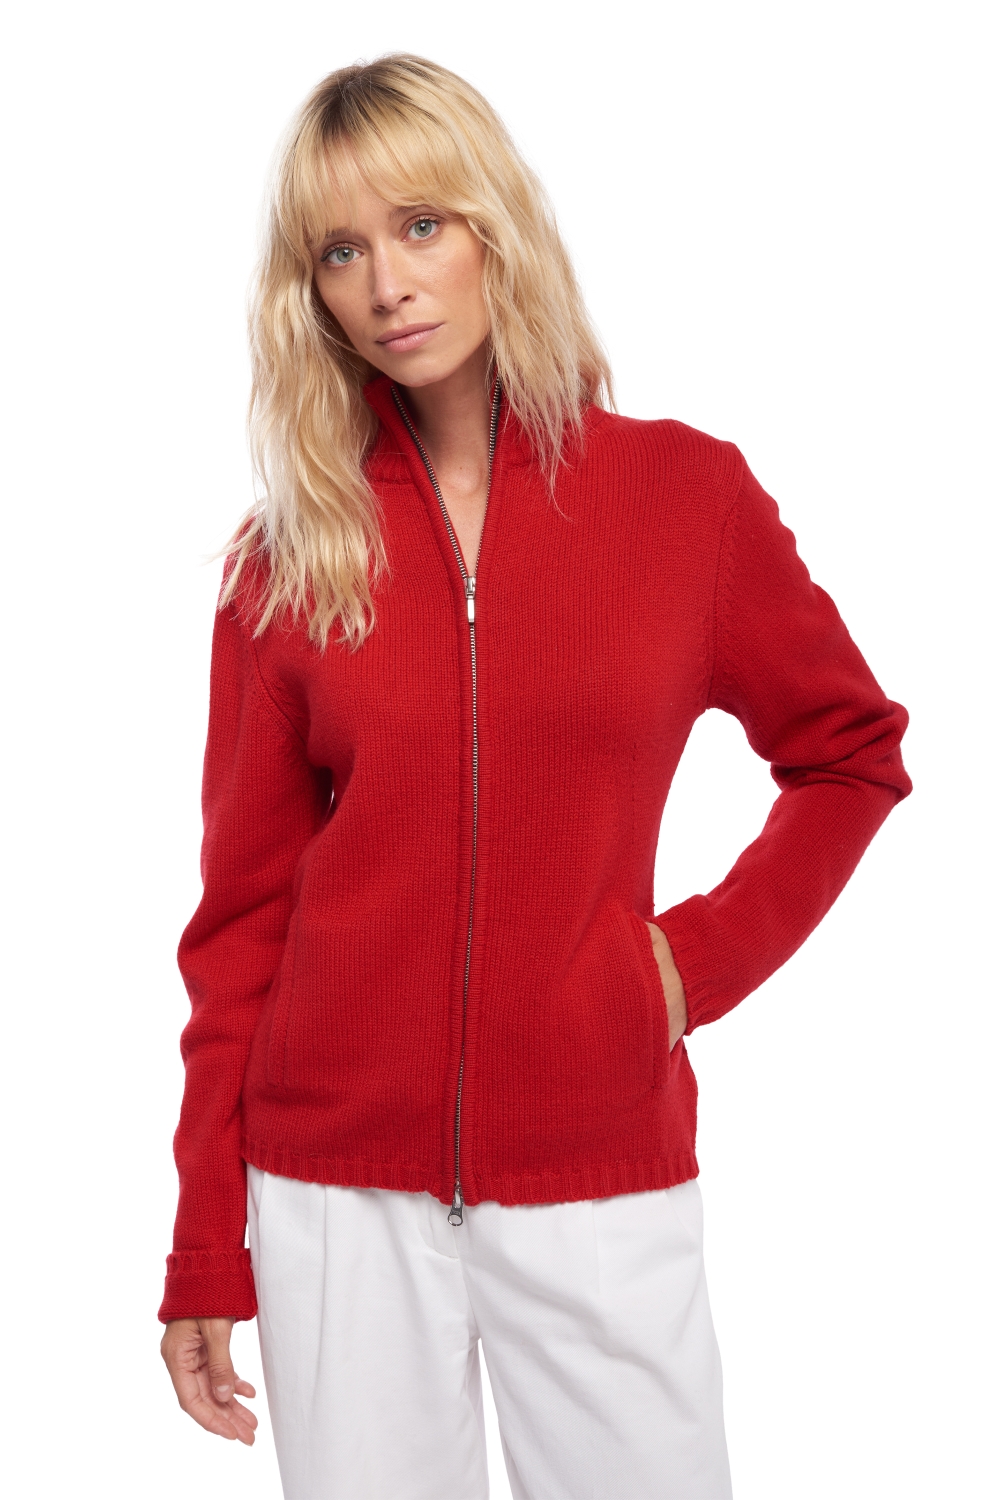 Cachemire pull femme elodie rouge velours s